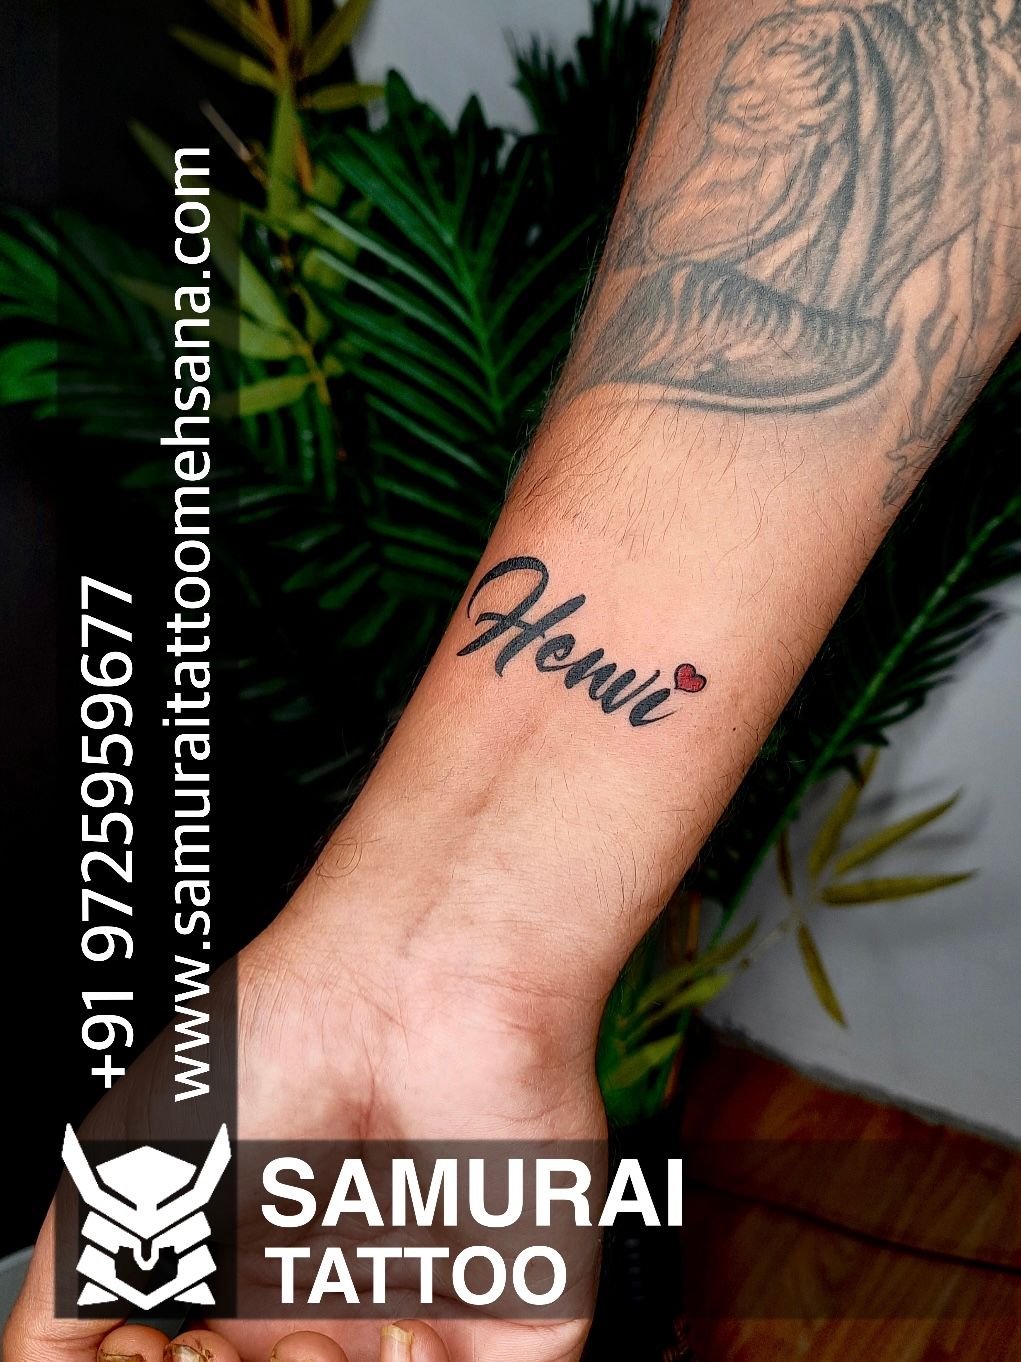 Tattoo uploaded by Vipul Chaudhary  Parth name tattoo Parth name Parth name  tattoo design  Tattoodo